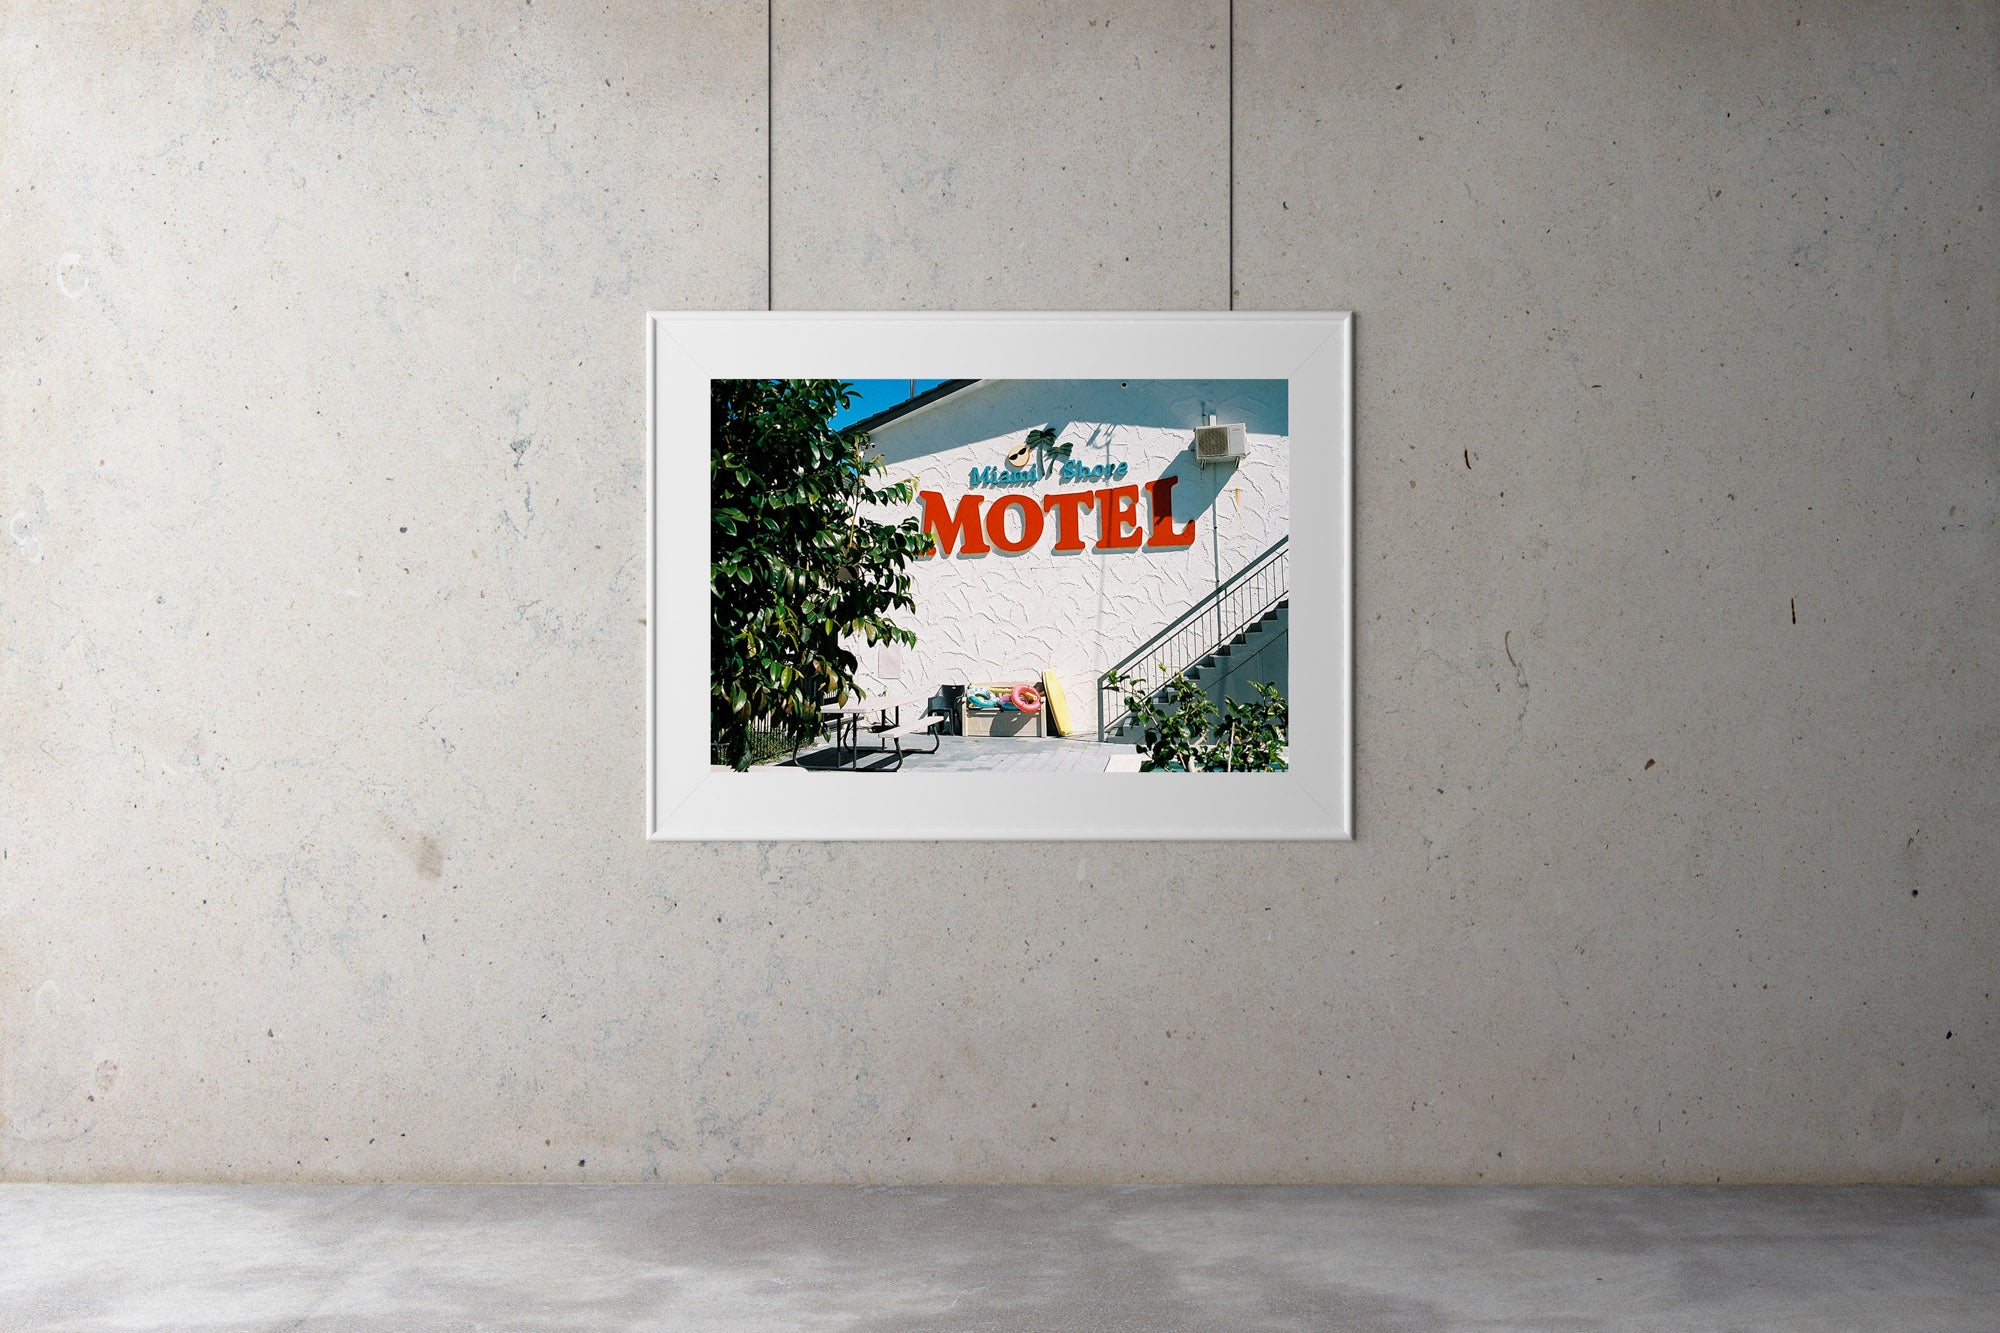 A photograph of a 1960’s motel with a big red sign that says motel. Artwork, Prints, wall art, GoldCoast Queensland Australia, Photographic prints, Ocean Beach, buy artwork, buy prints Framed artwork, Beach Posters   Film photography, Vintage photo style,  Interior design, Film photography Pictures sun & surf ,photography art